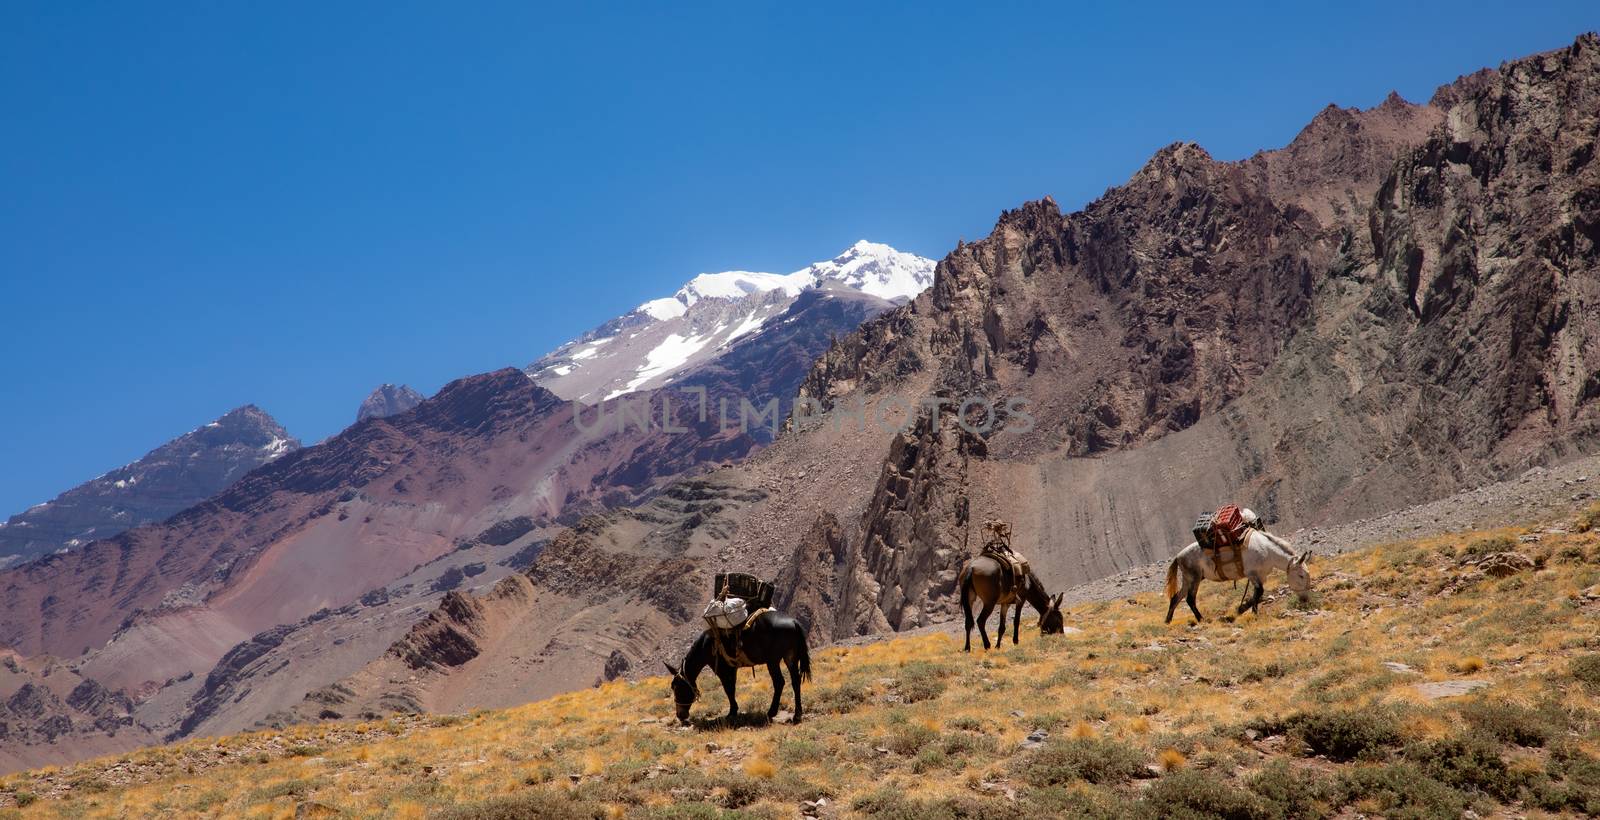 On the way to Aconcagua base camp